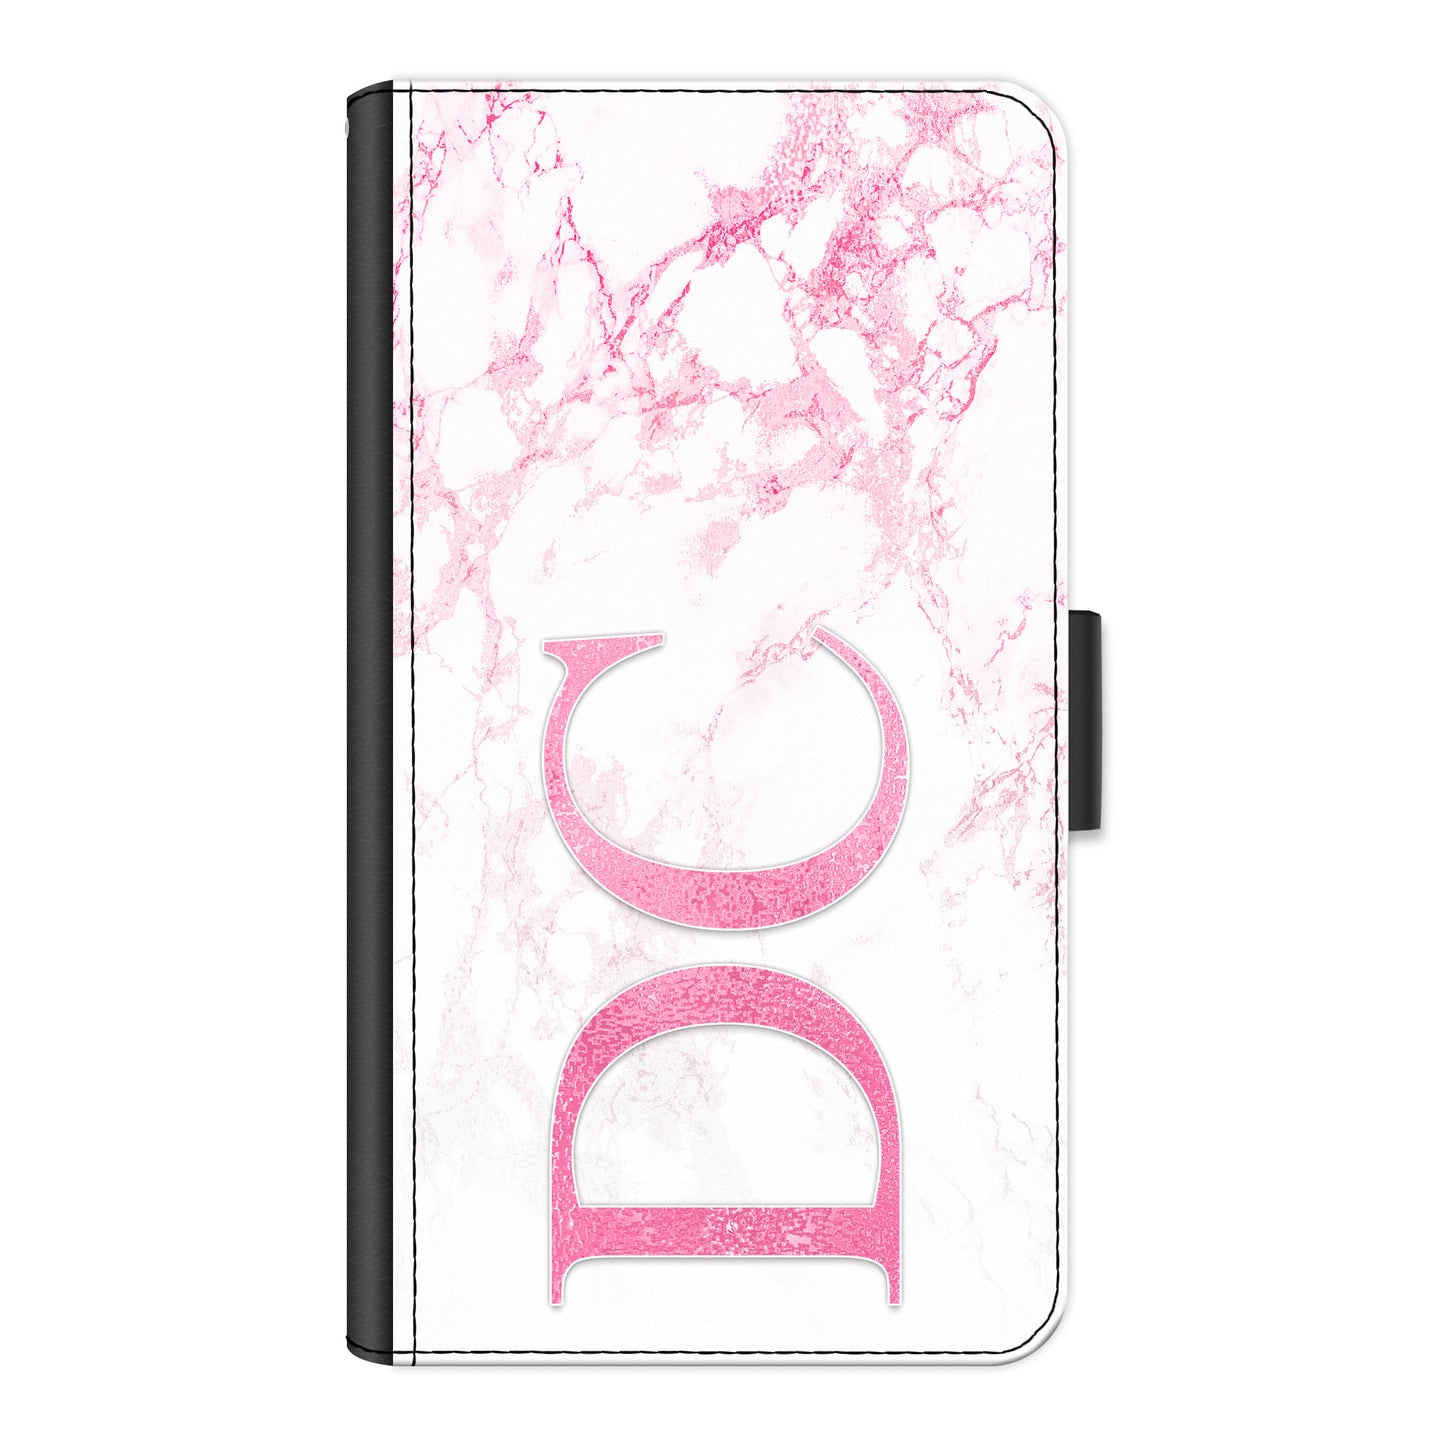 Personalised Apple iPhone Leather Wallet with Pink Initials on Pink Marble